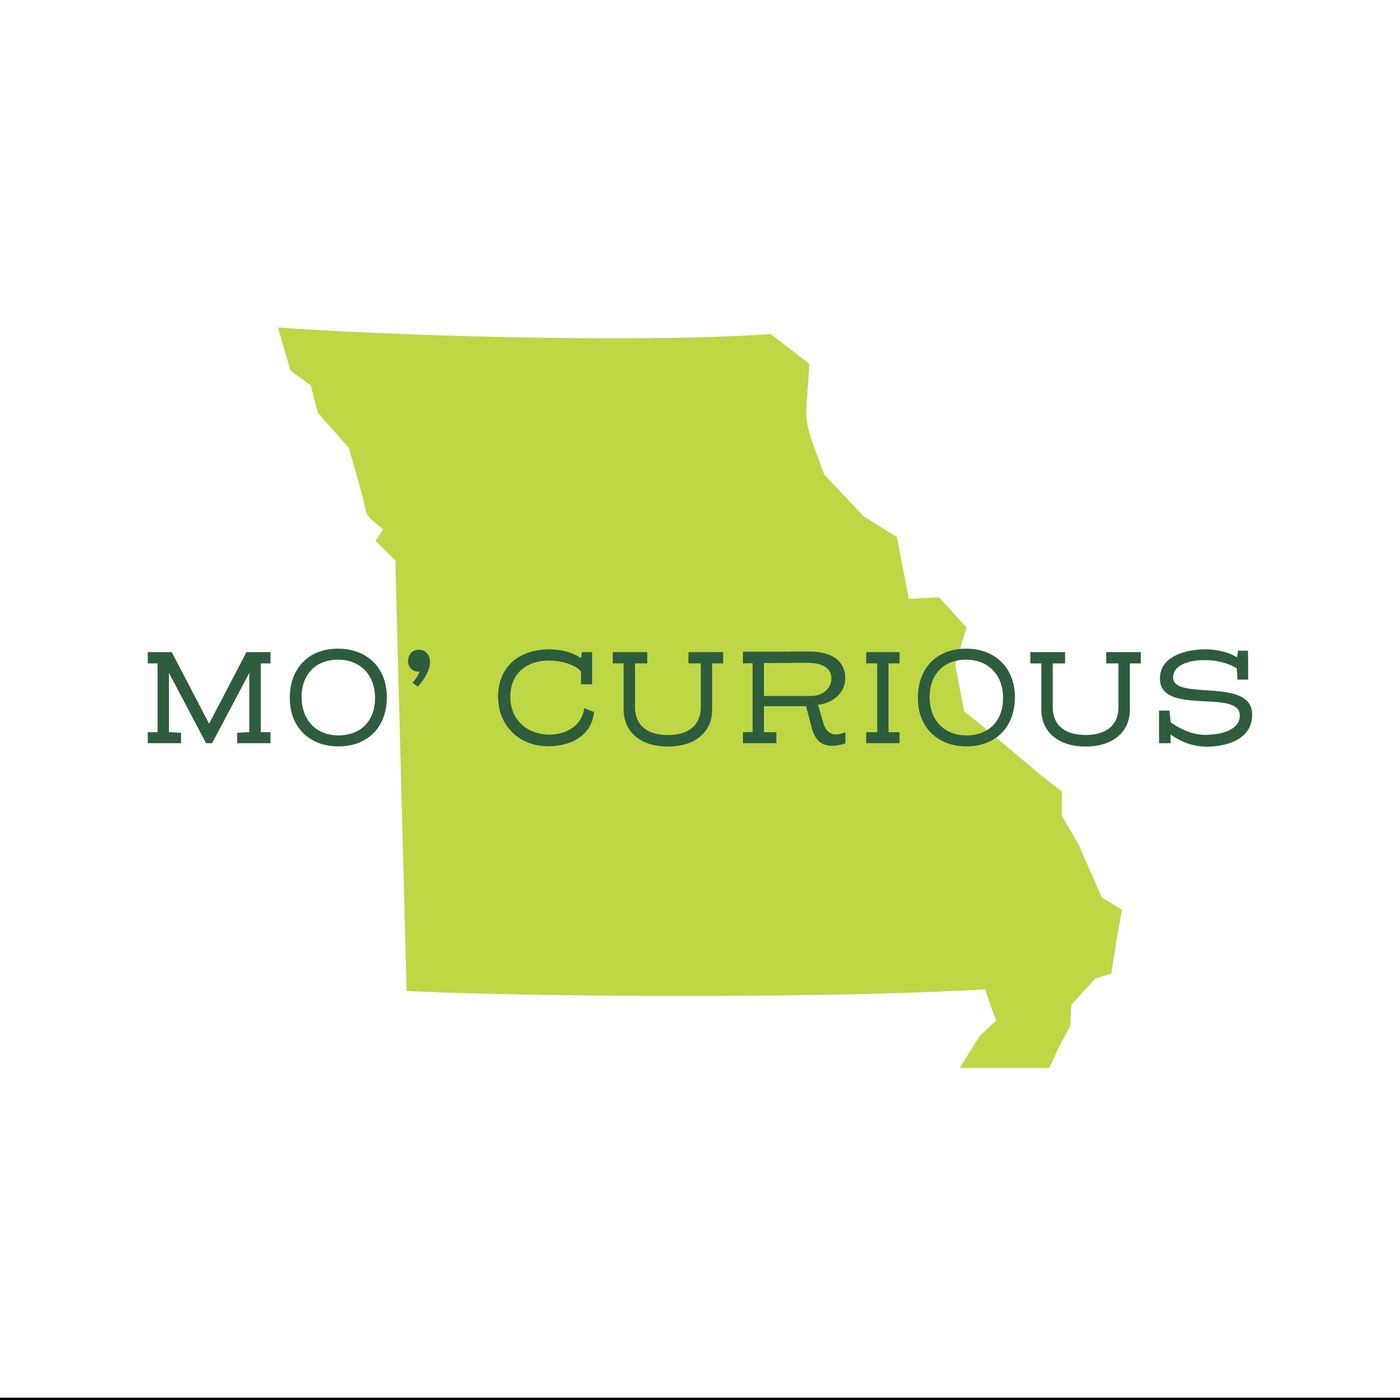 Mo' Curious: A Recent History of Bosnians in St. Louis